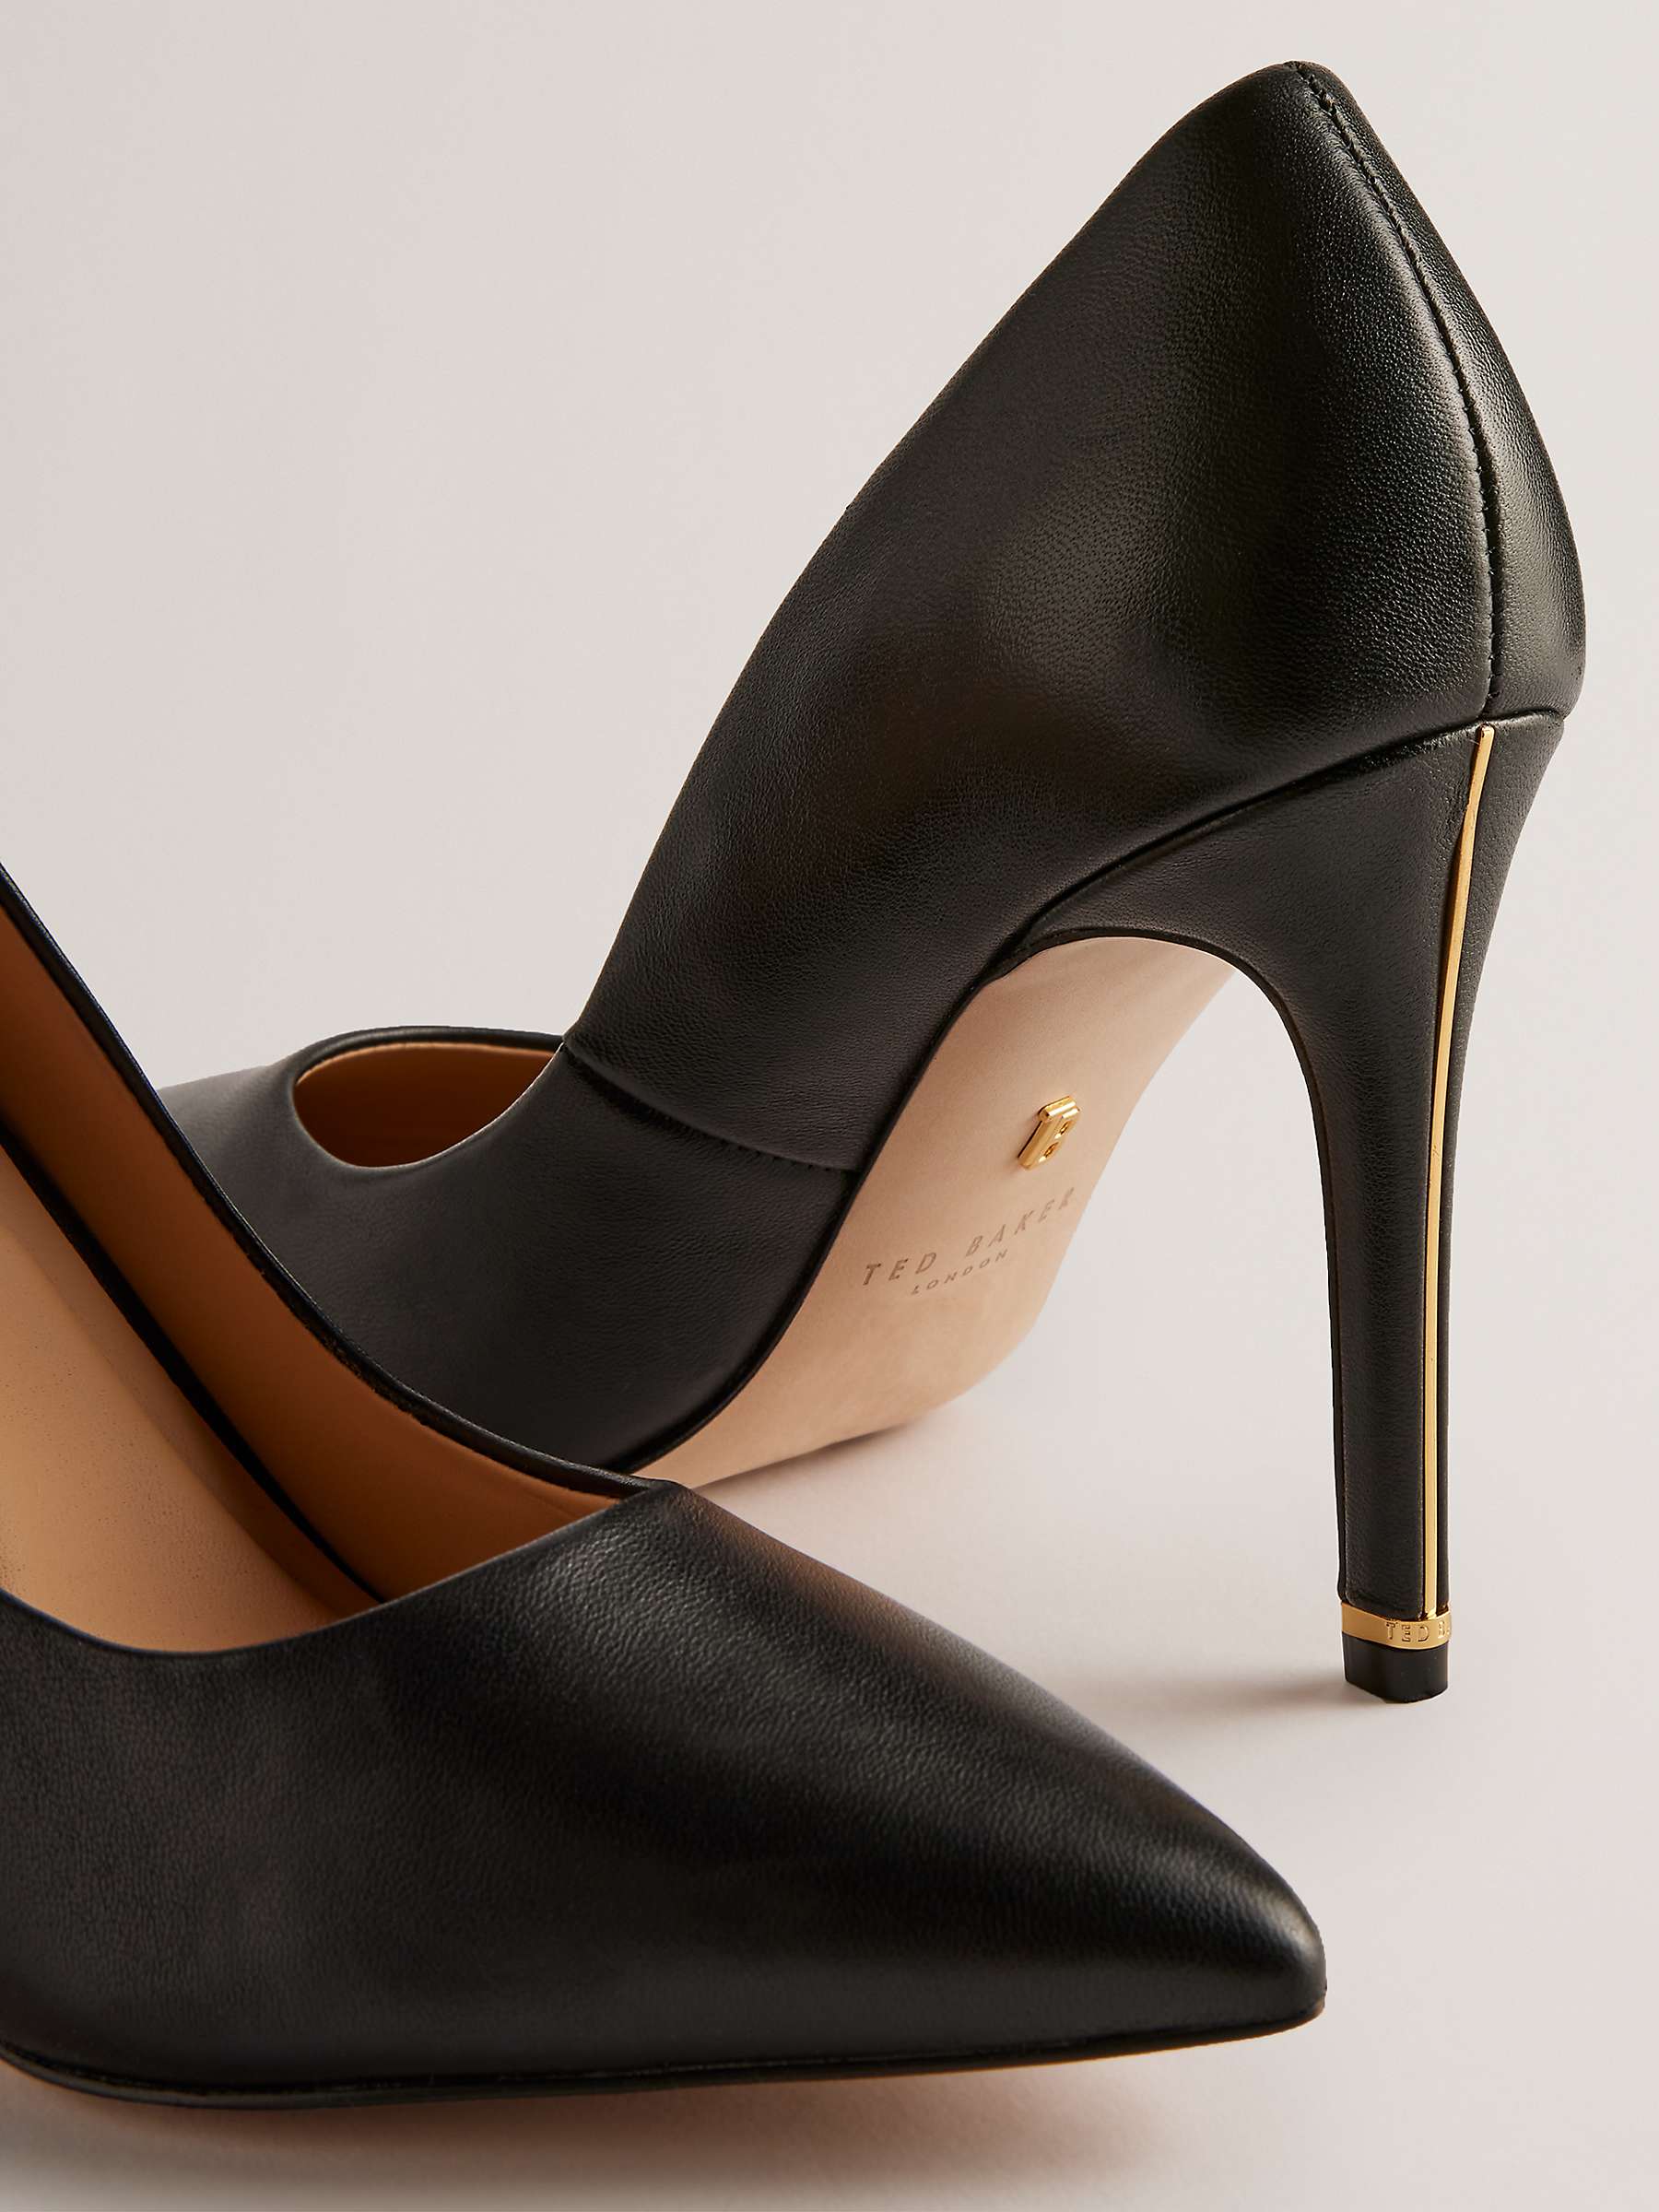 Buy Ted Baker Caaraa High Heel Leather Court Shoes Online at johnlewis.com